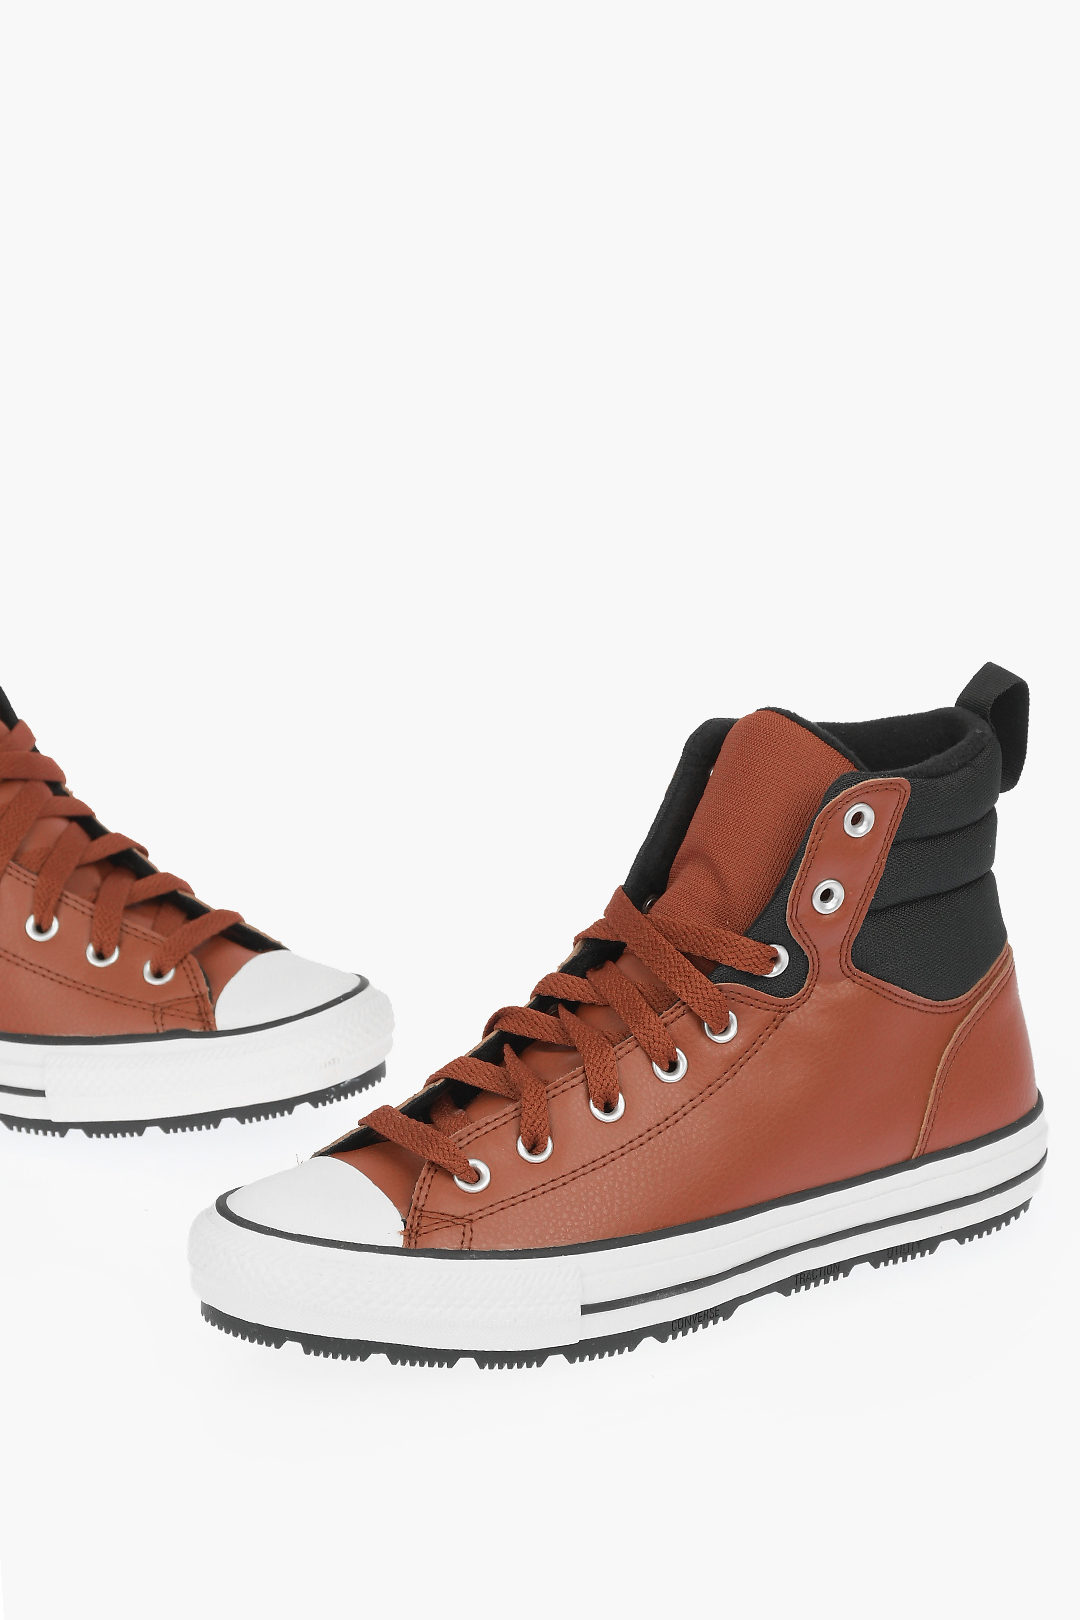 Converse ALL Leather Sneakers men - Glamood Outlet